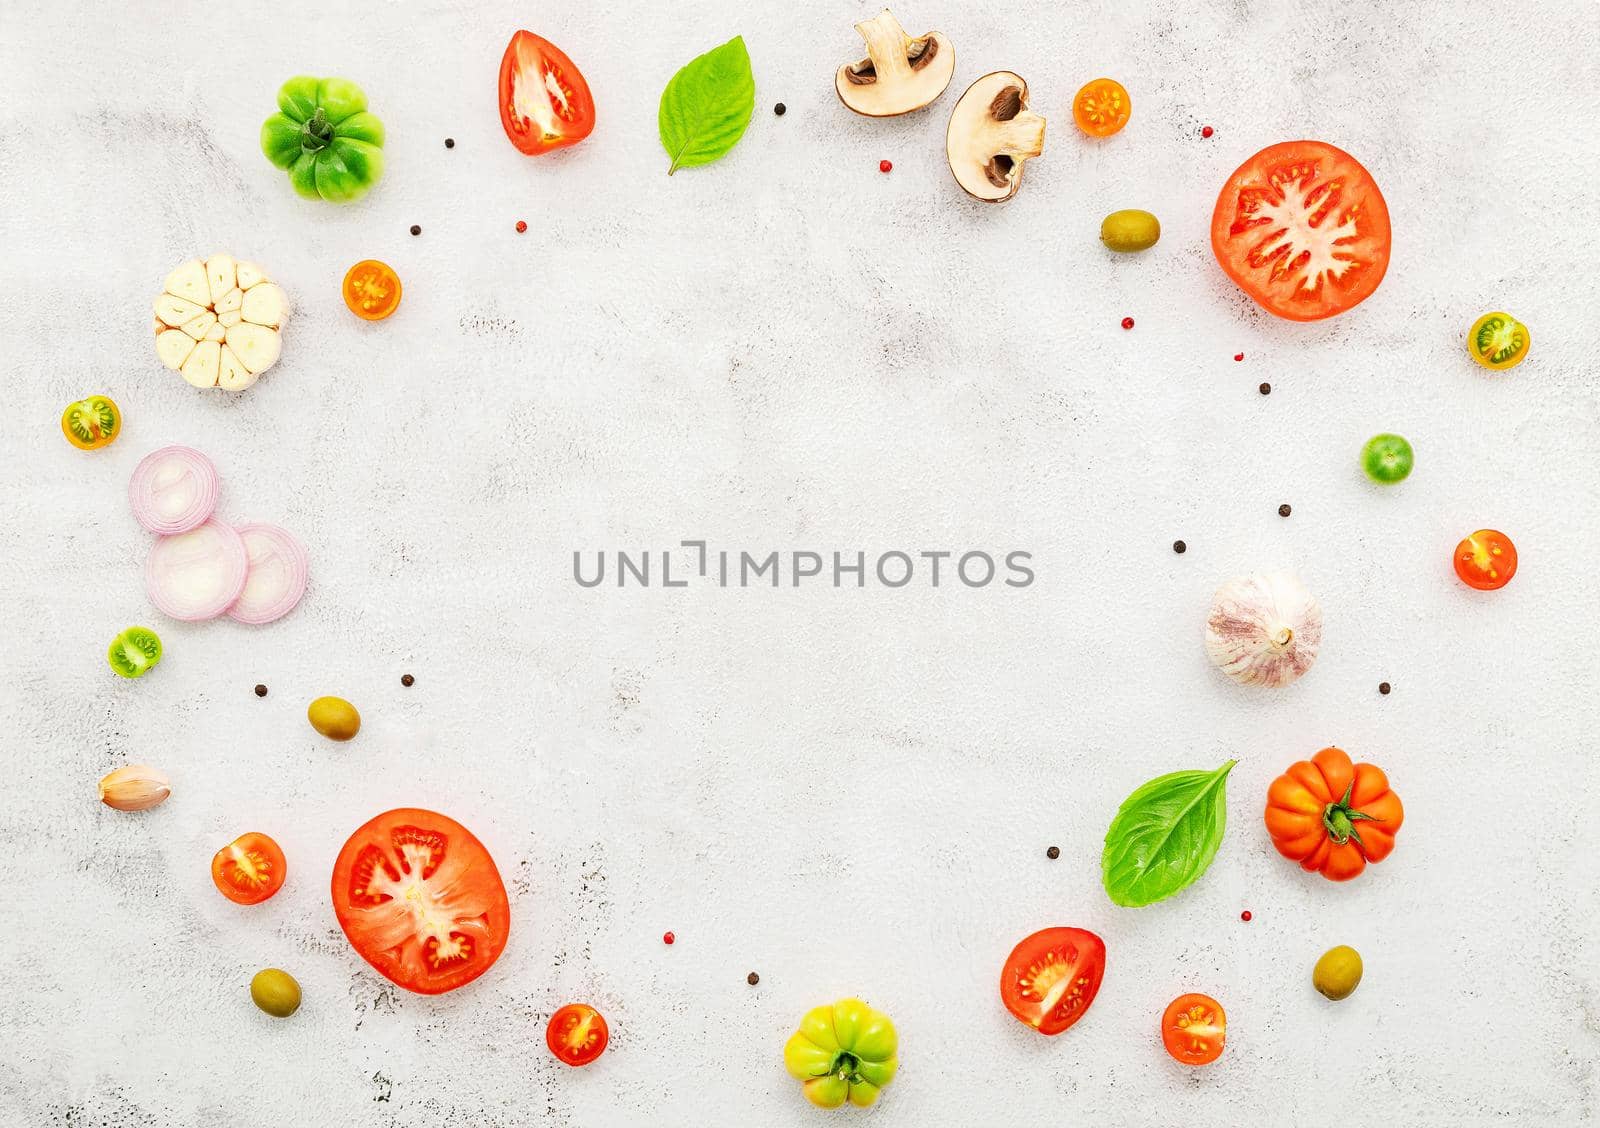 The ingredients for homemade pizza set up on white concrete background.